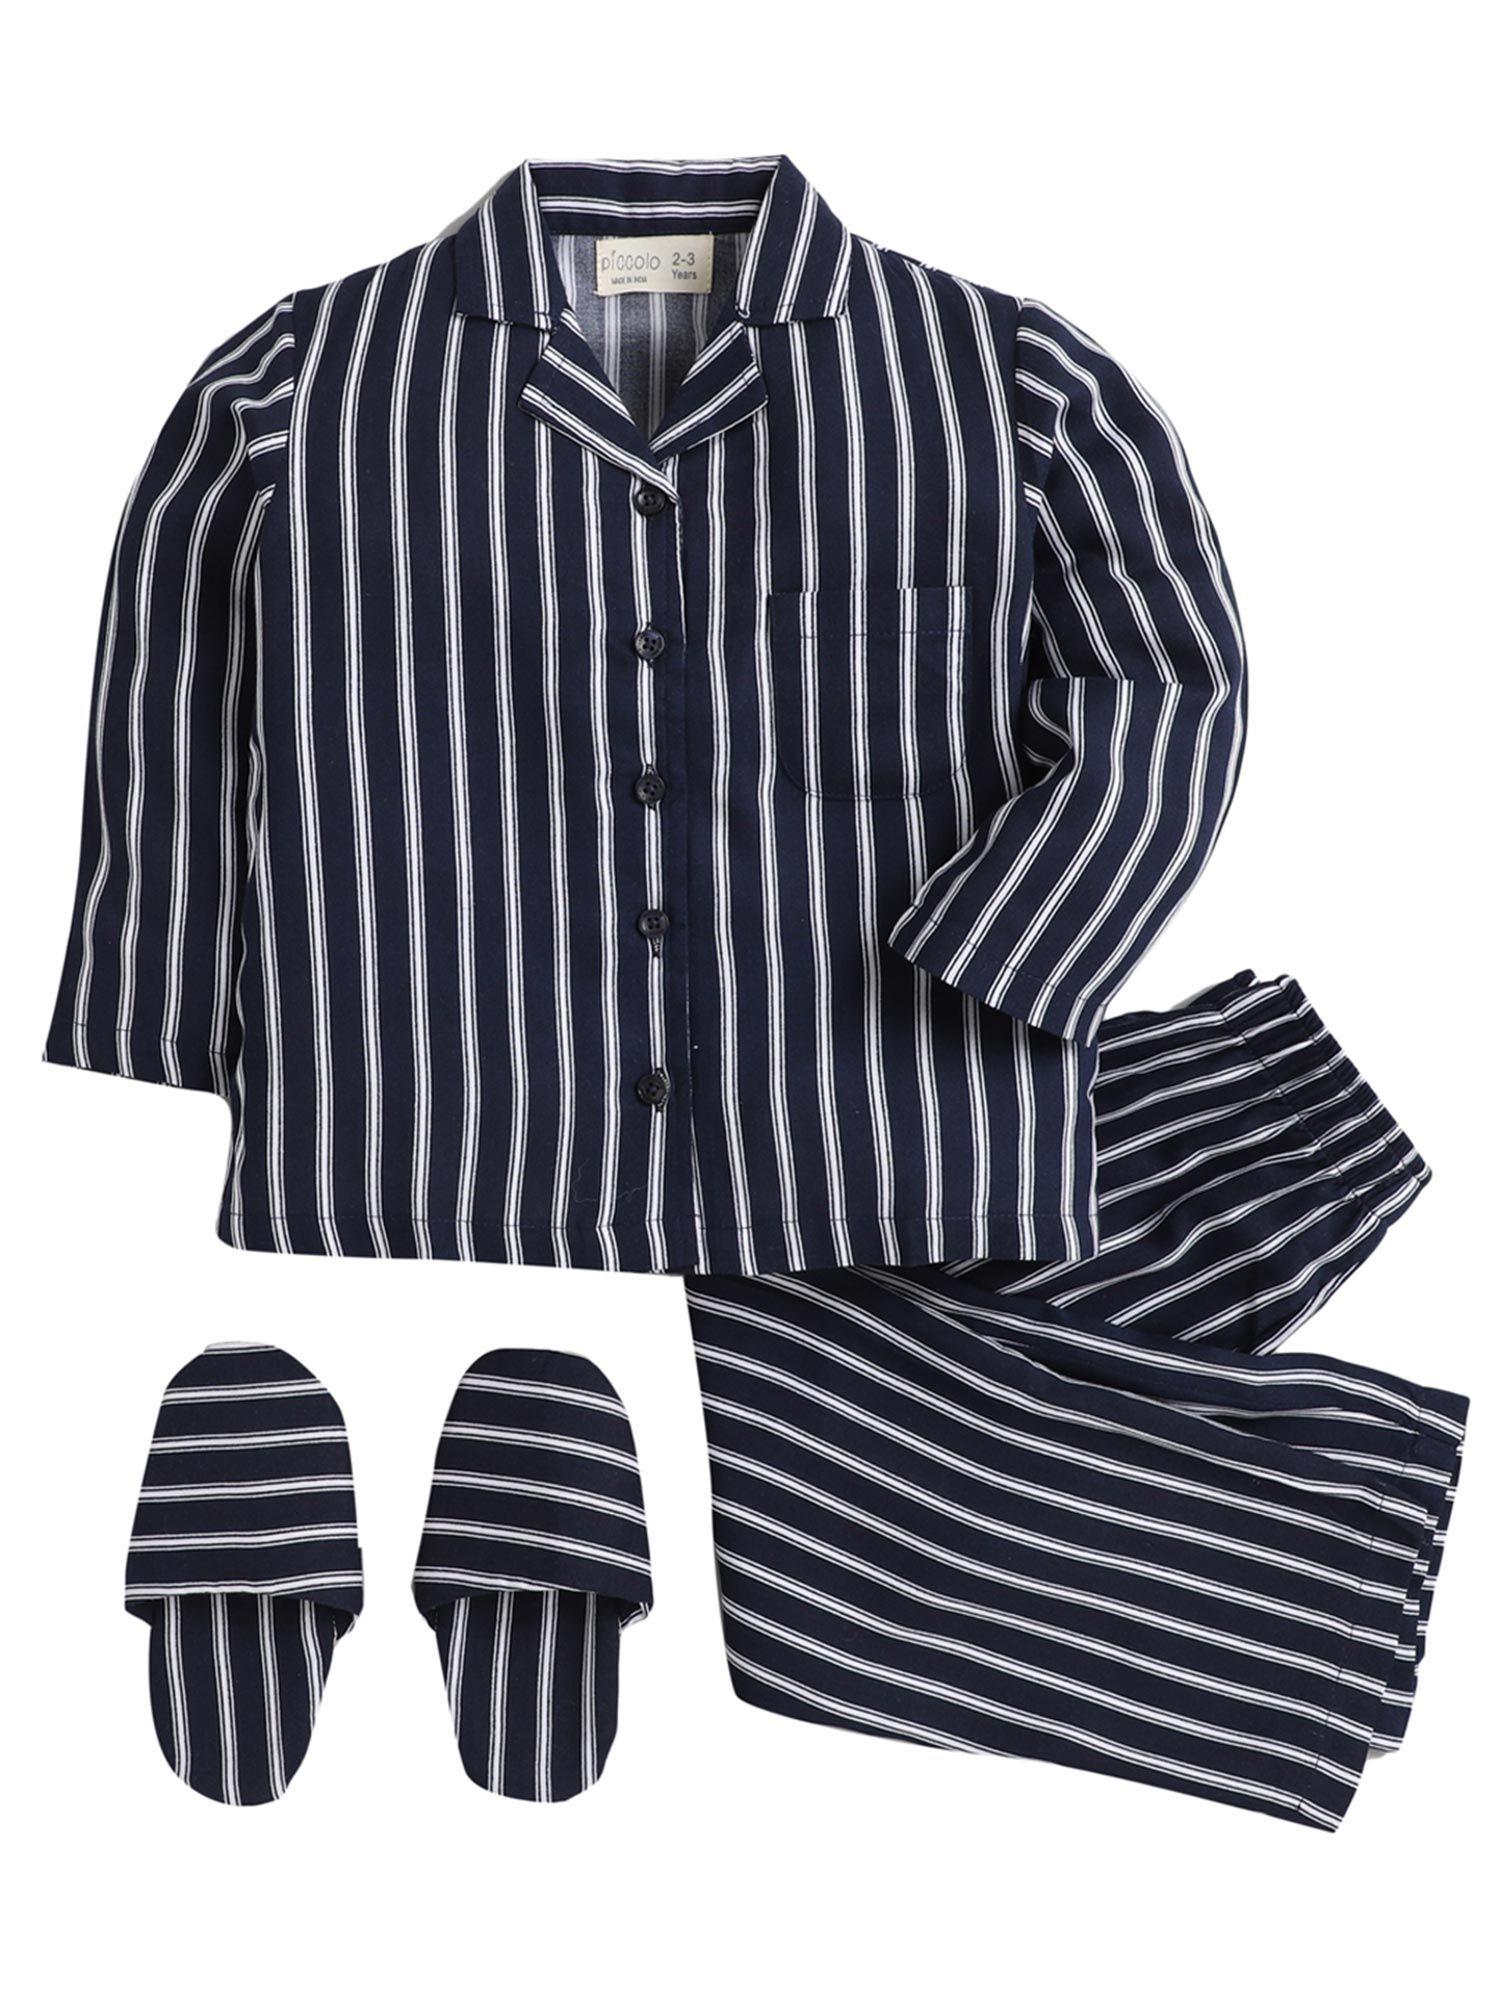 black-full-sleeves-stripes-top-and-pyjama-set-with-slippers-(set-of-3)